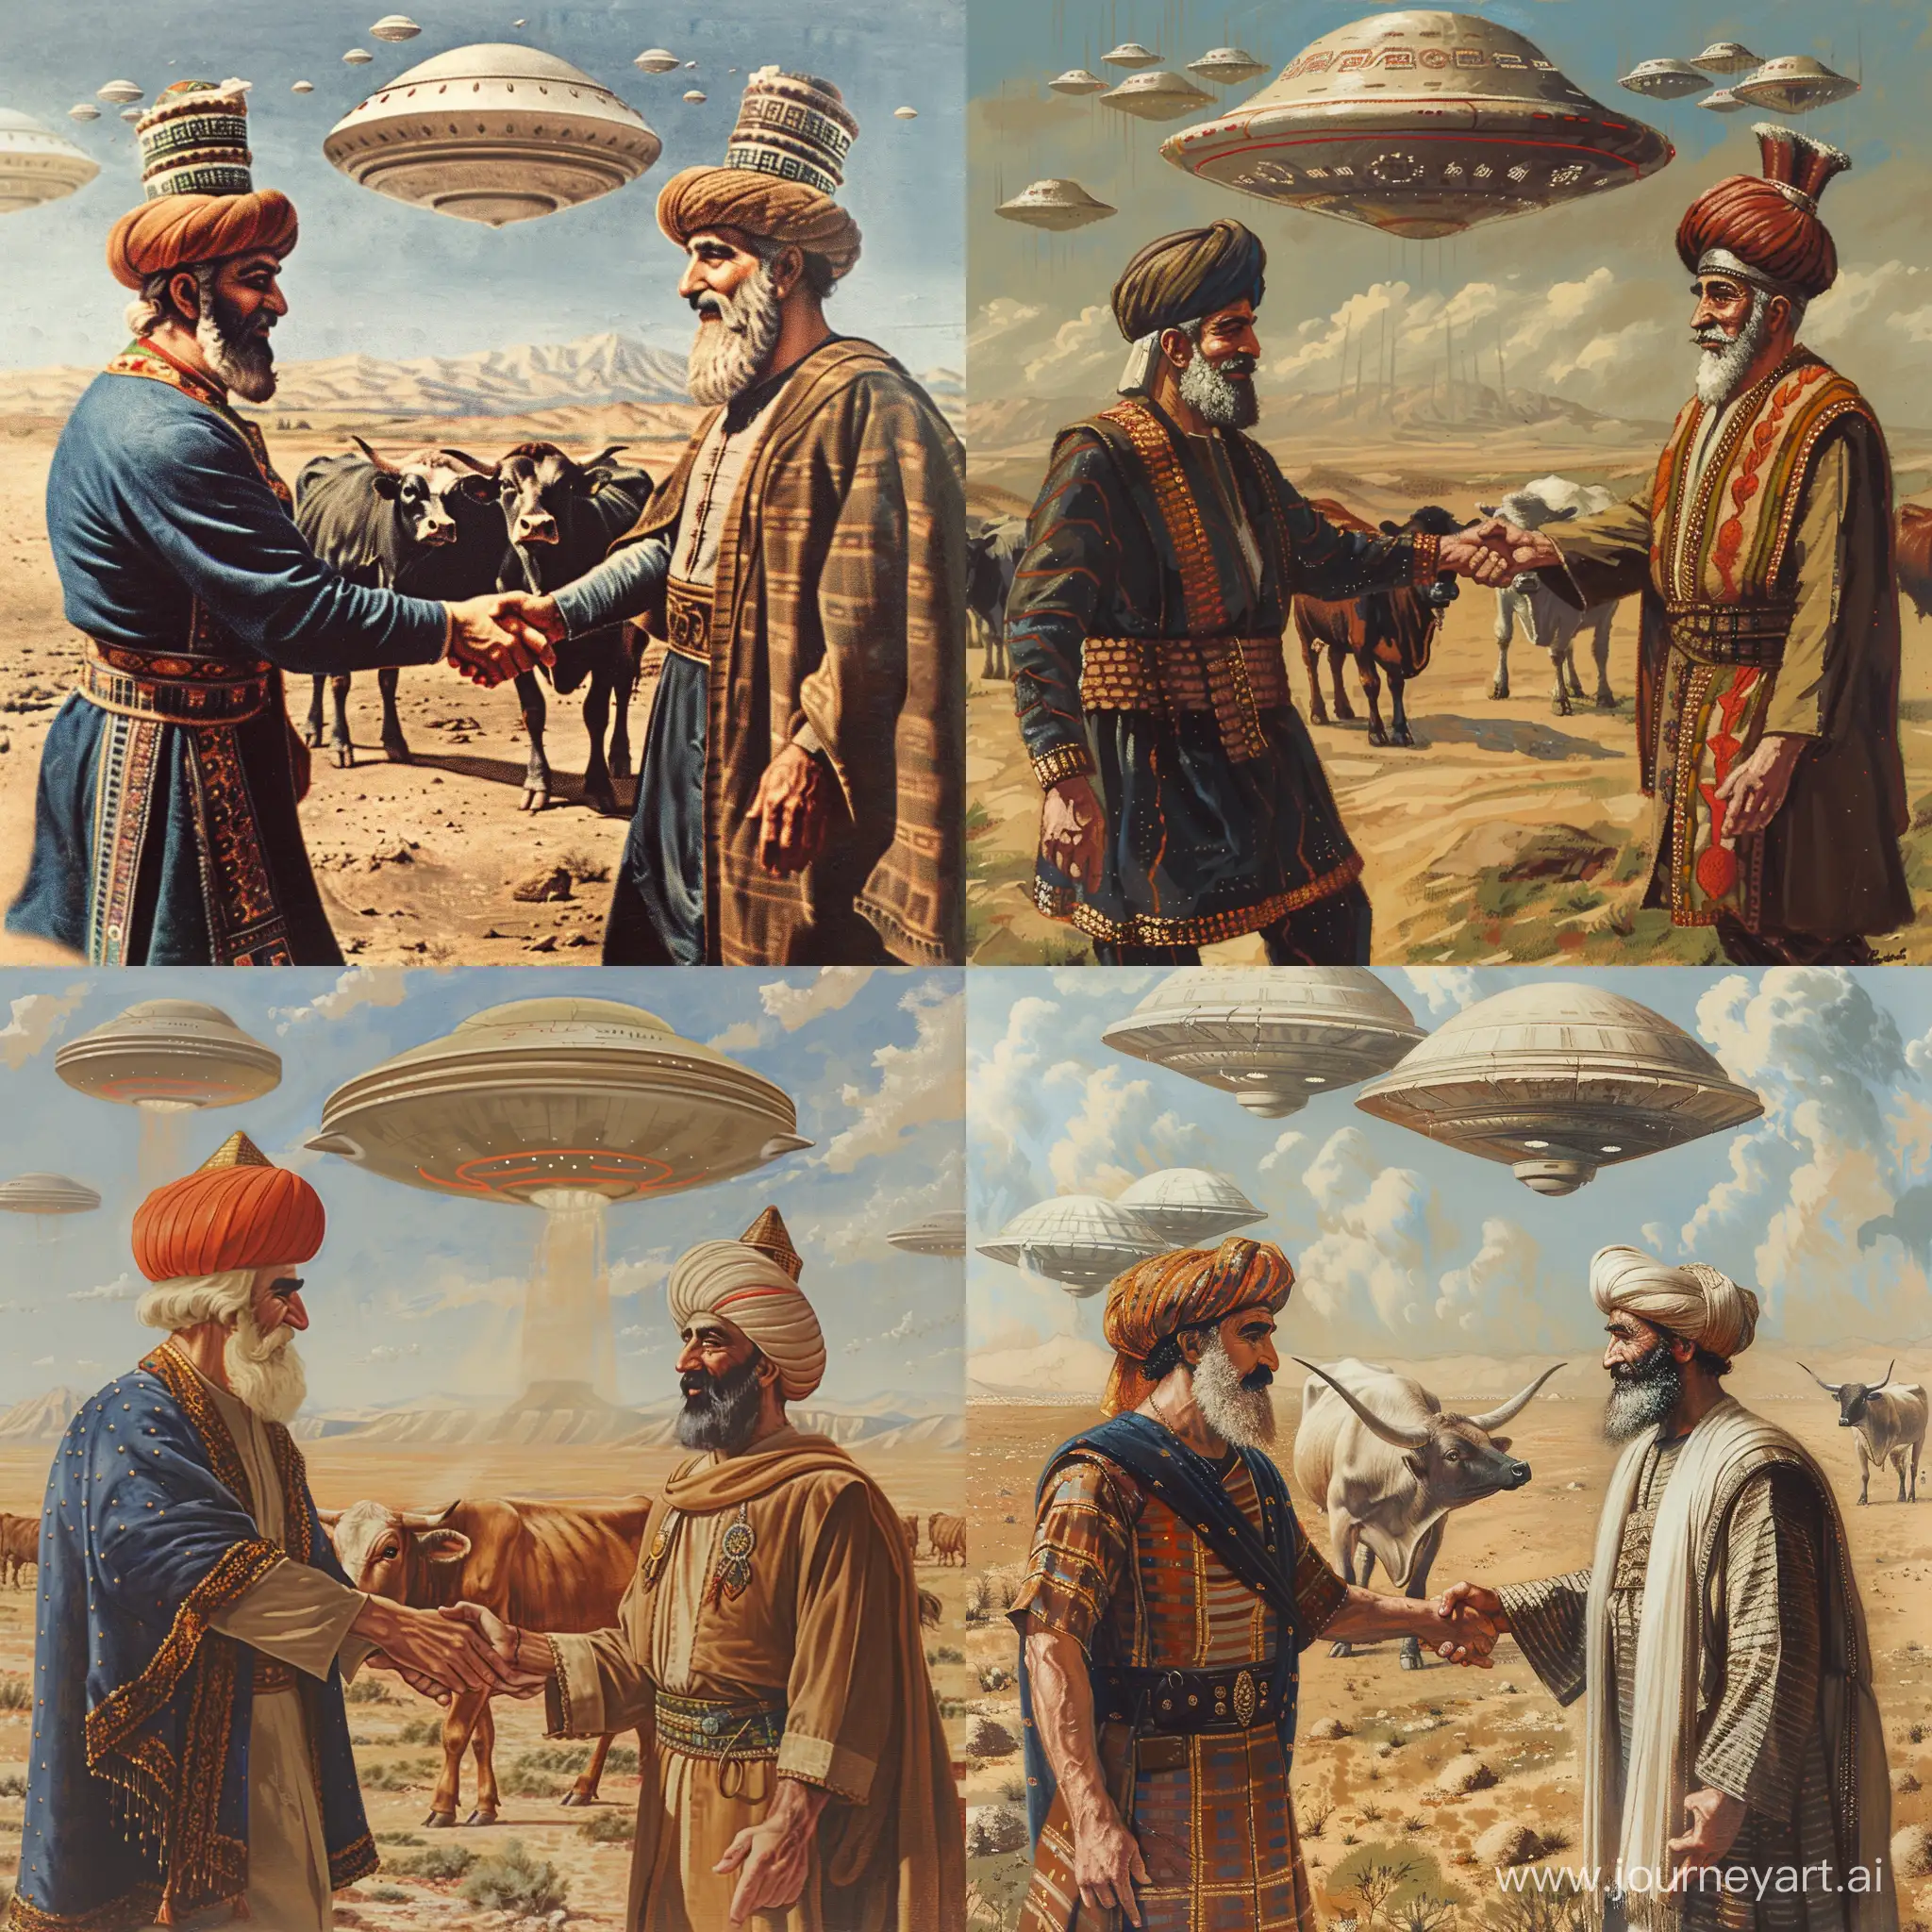 cyrus the great achaemenid empire is shaking Nader Shah Afshar hands and both are smiling, in a desert,lofi,ufos background is trying to take a cow up,--q2,--ar7:4